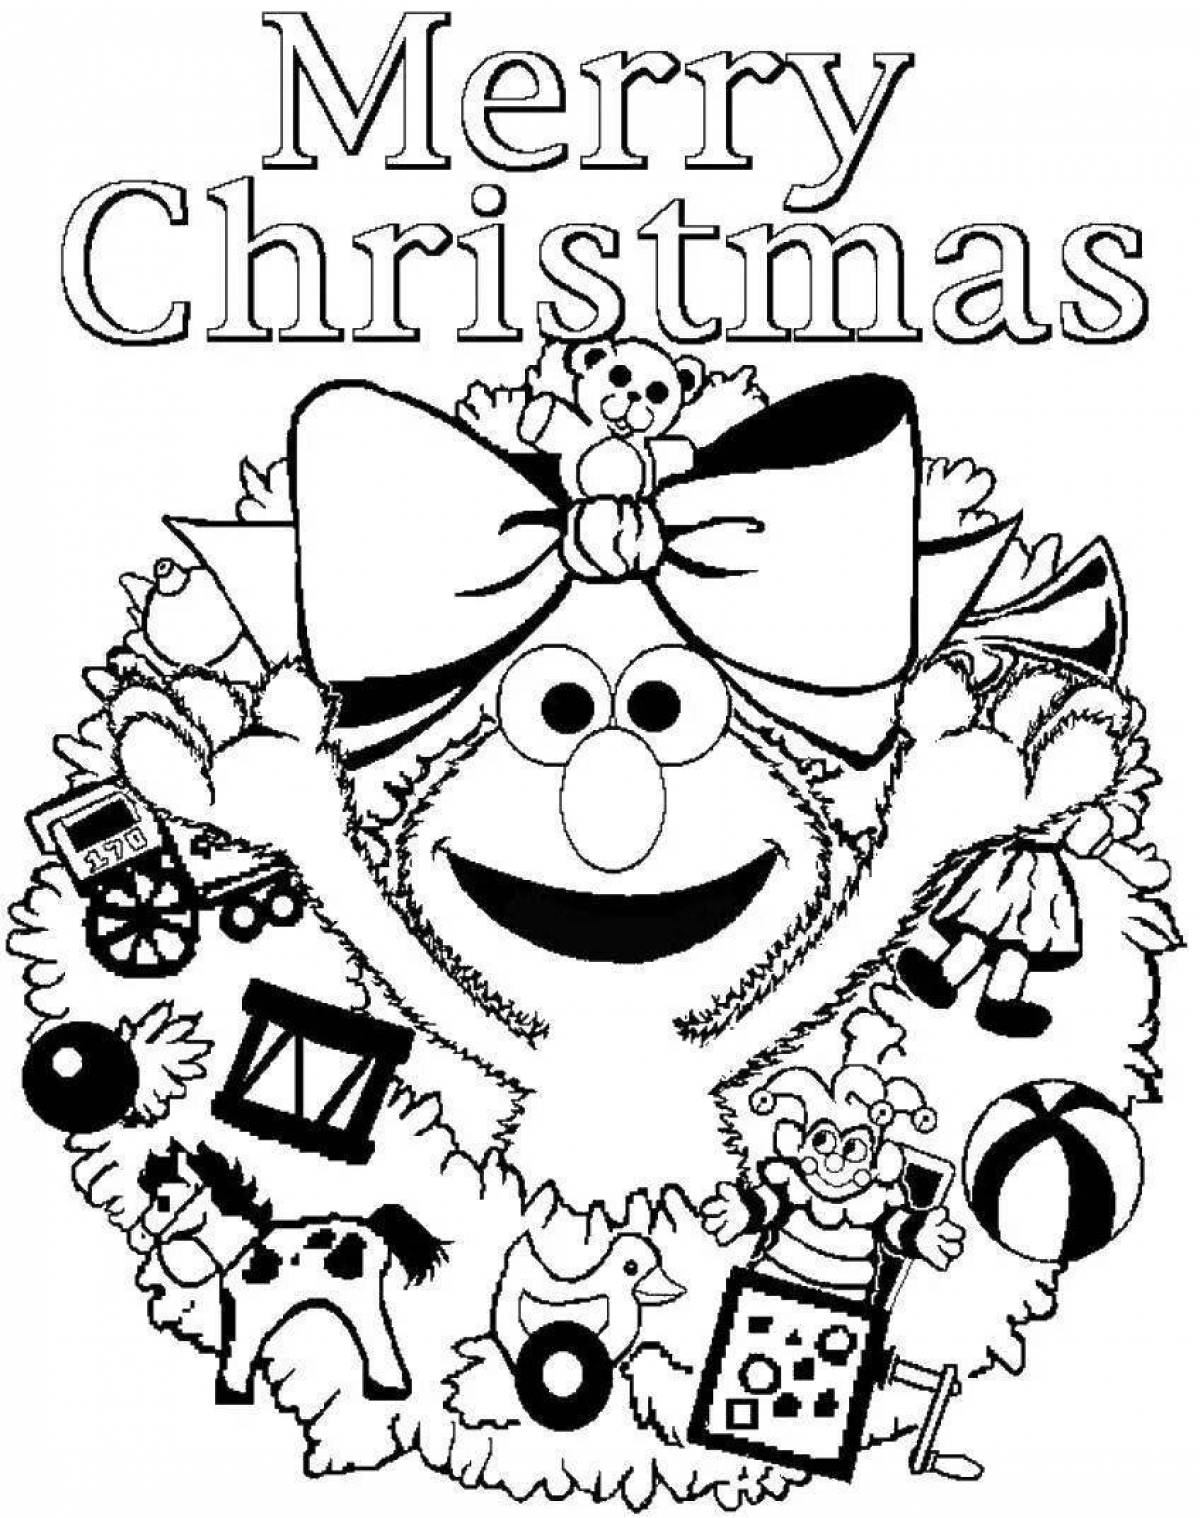 Merry Christmas and Happy New Year holiday coloring book